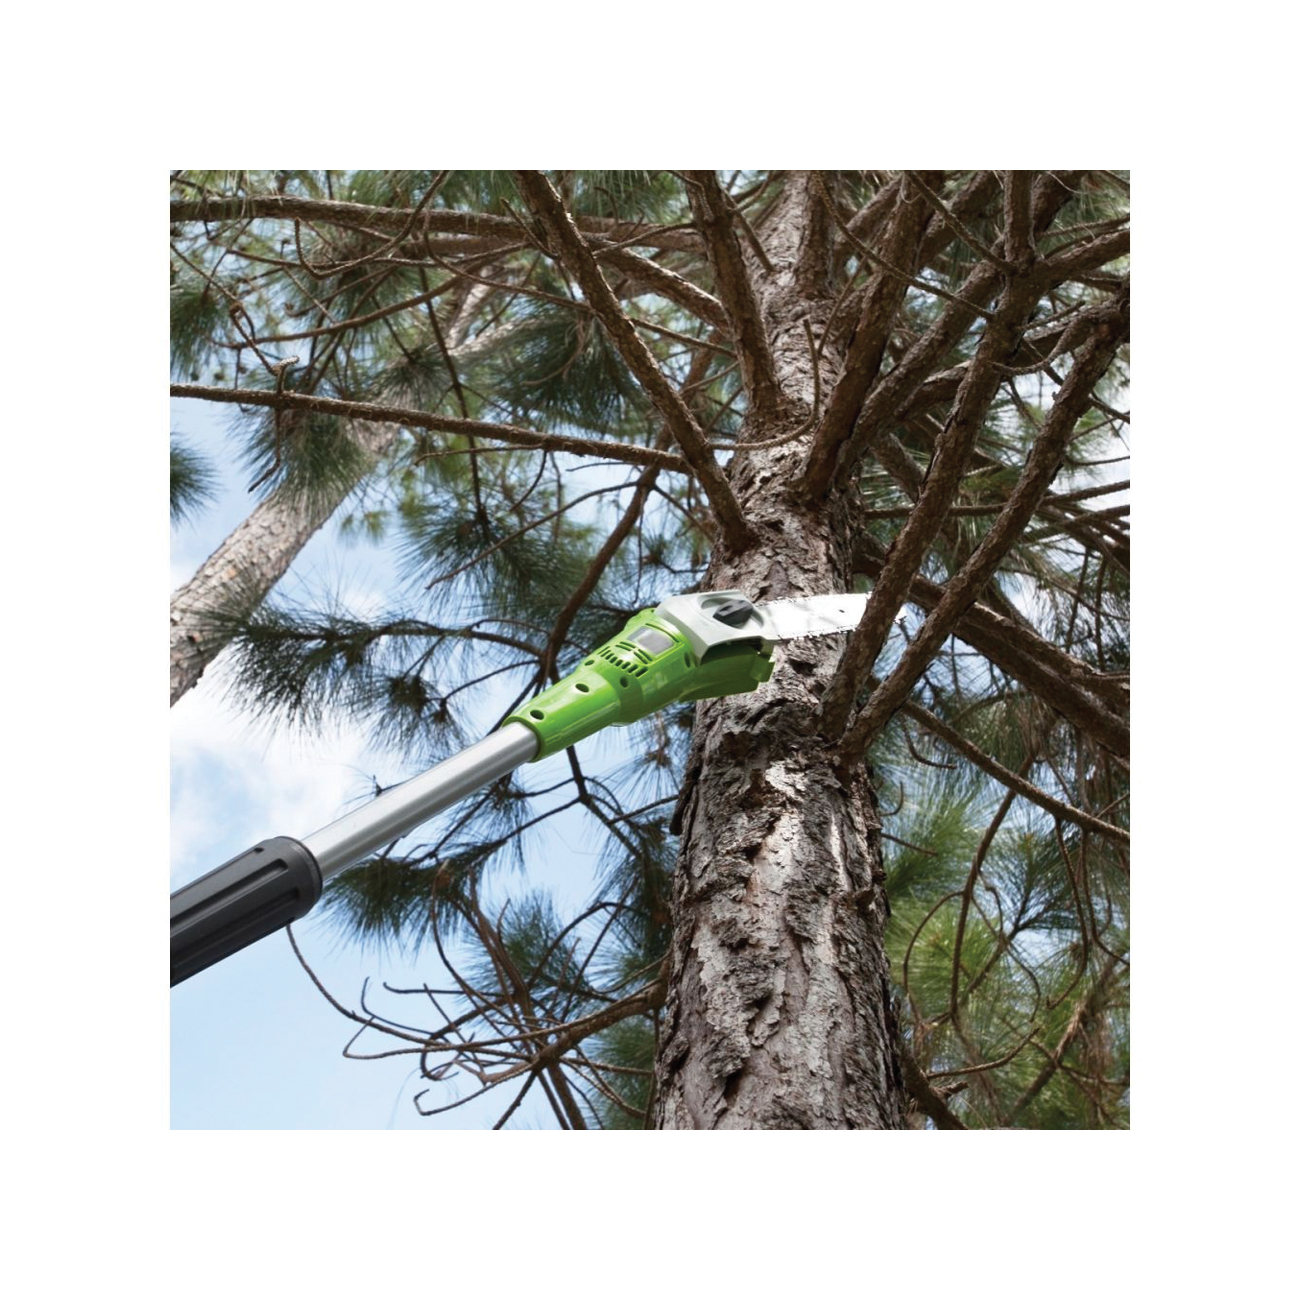 Greenworks 20192 Pole Saw, 6.5 A, 8 in Blade, Aluminum Pole, 95 in OAL - 3